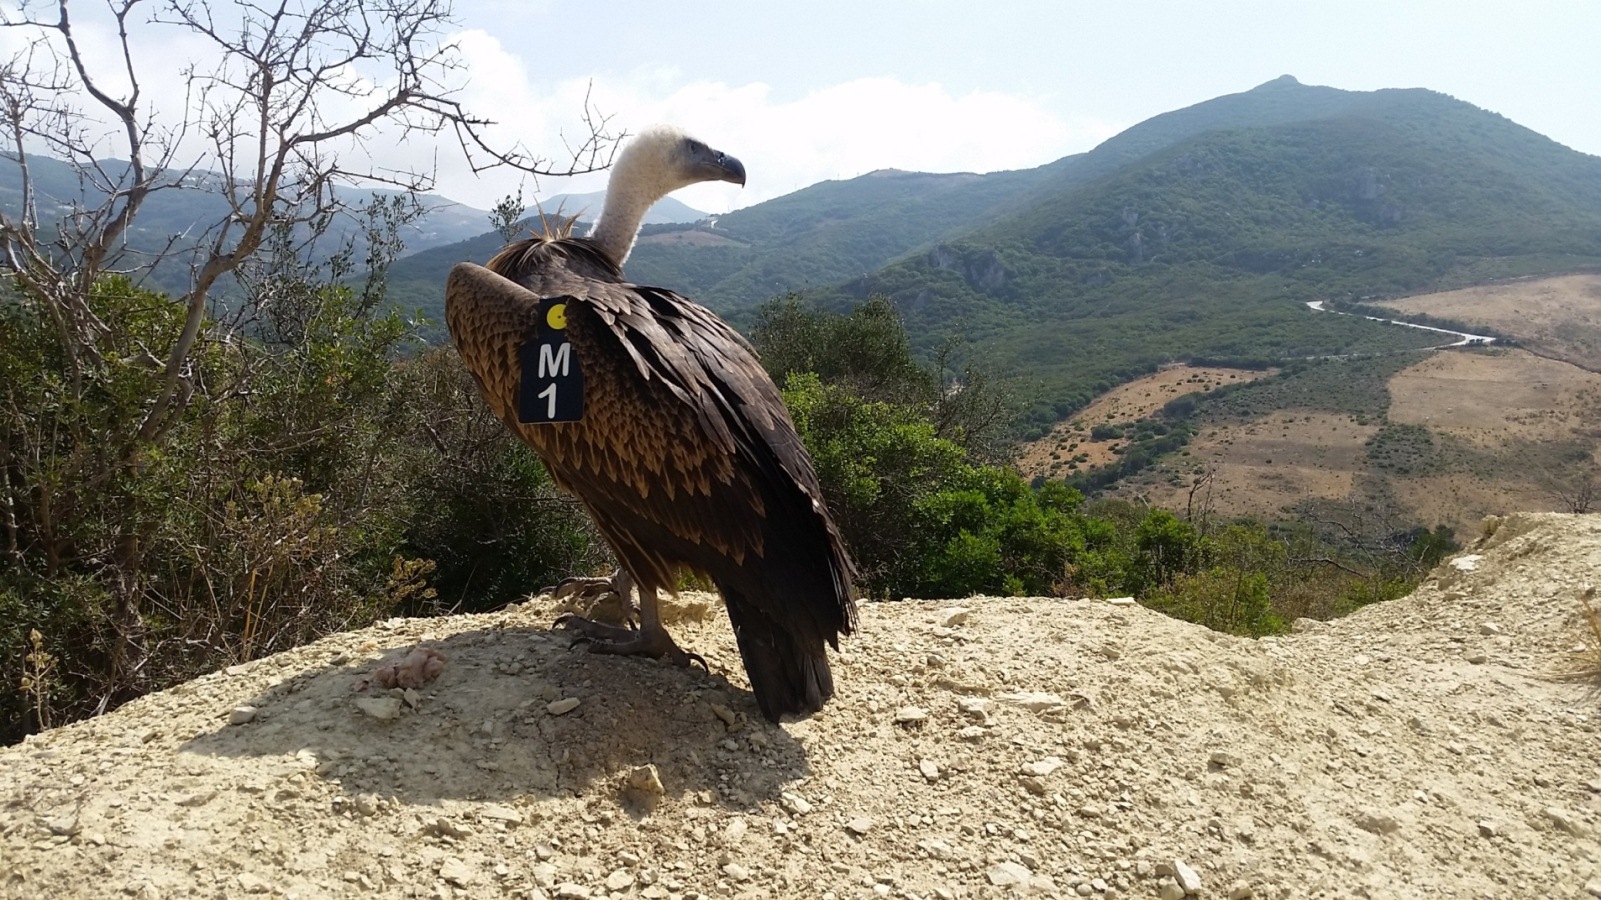 Rüppell's Vulture (Gyps rueppelli) wing-tagged and released at Jbel Moussa, northern Morocco (Sept 2016).